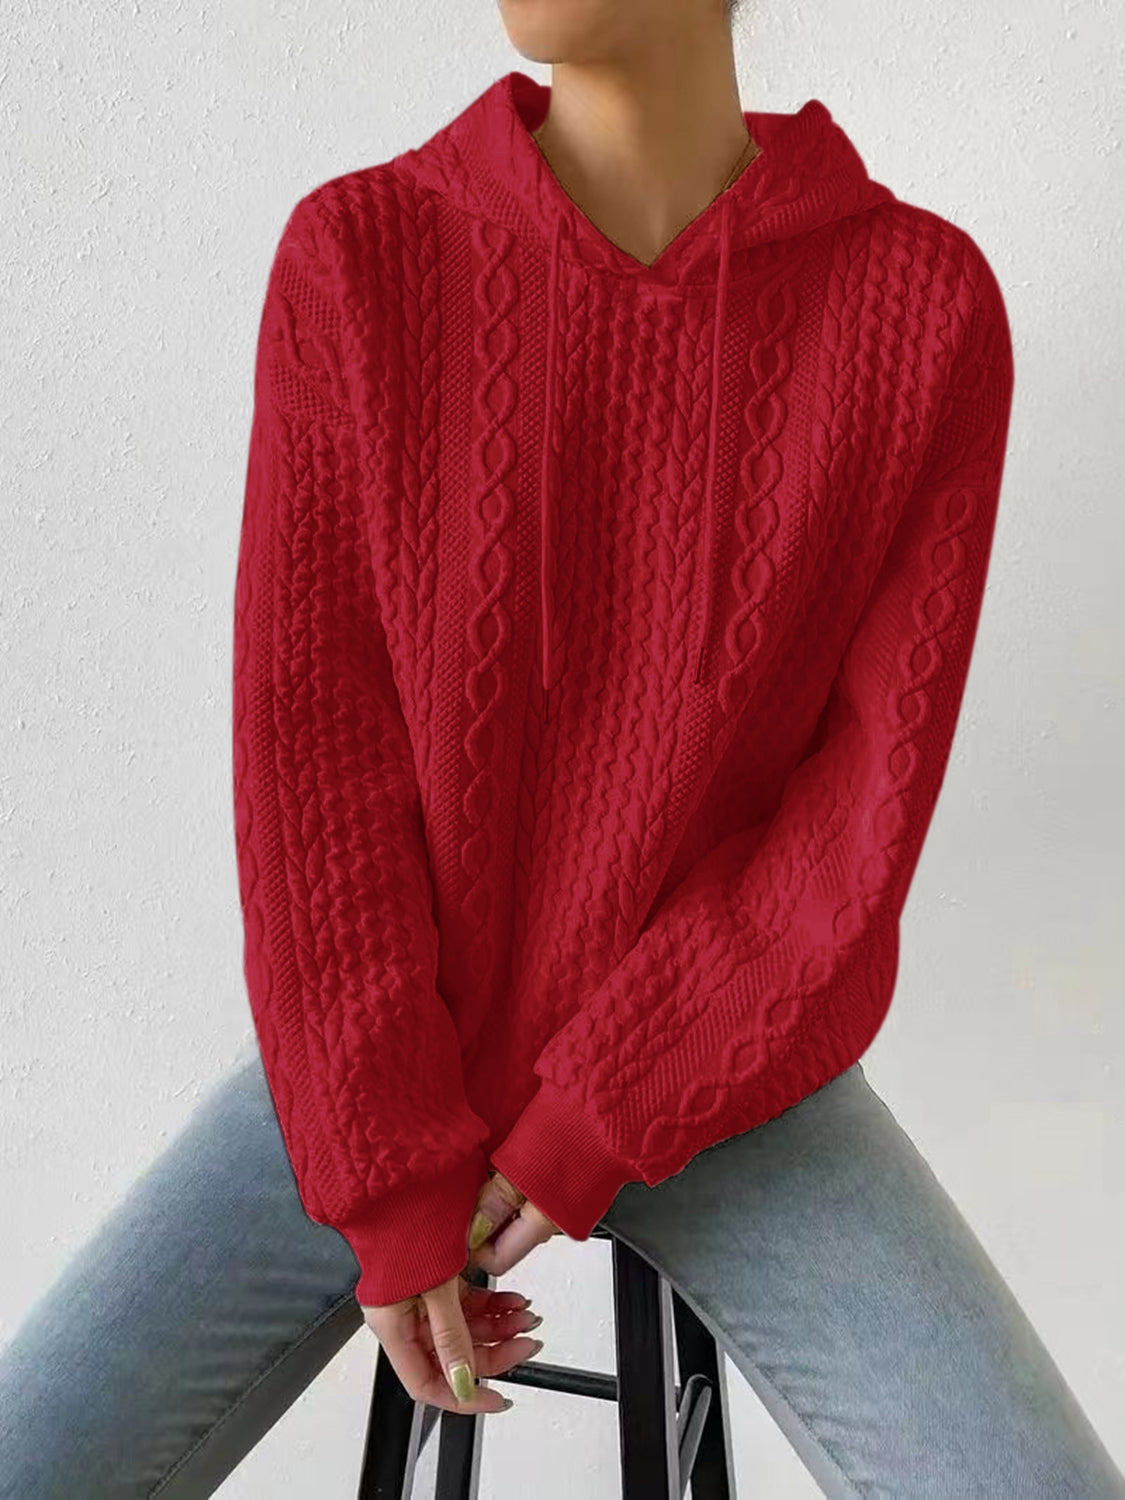 Textured Drawstring Long Sleeve Hoodie - Red / S - Women’s Clothing & Accessories - Shirts & Tops - 25 - 2024